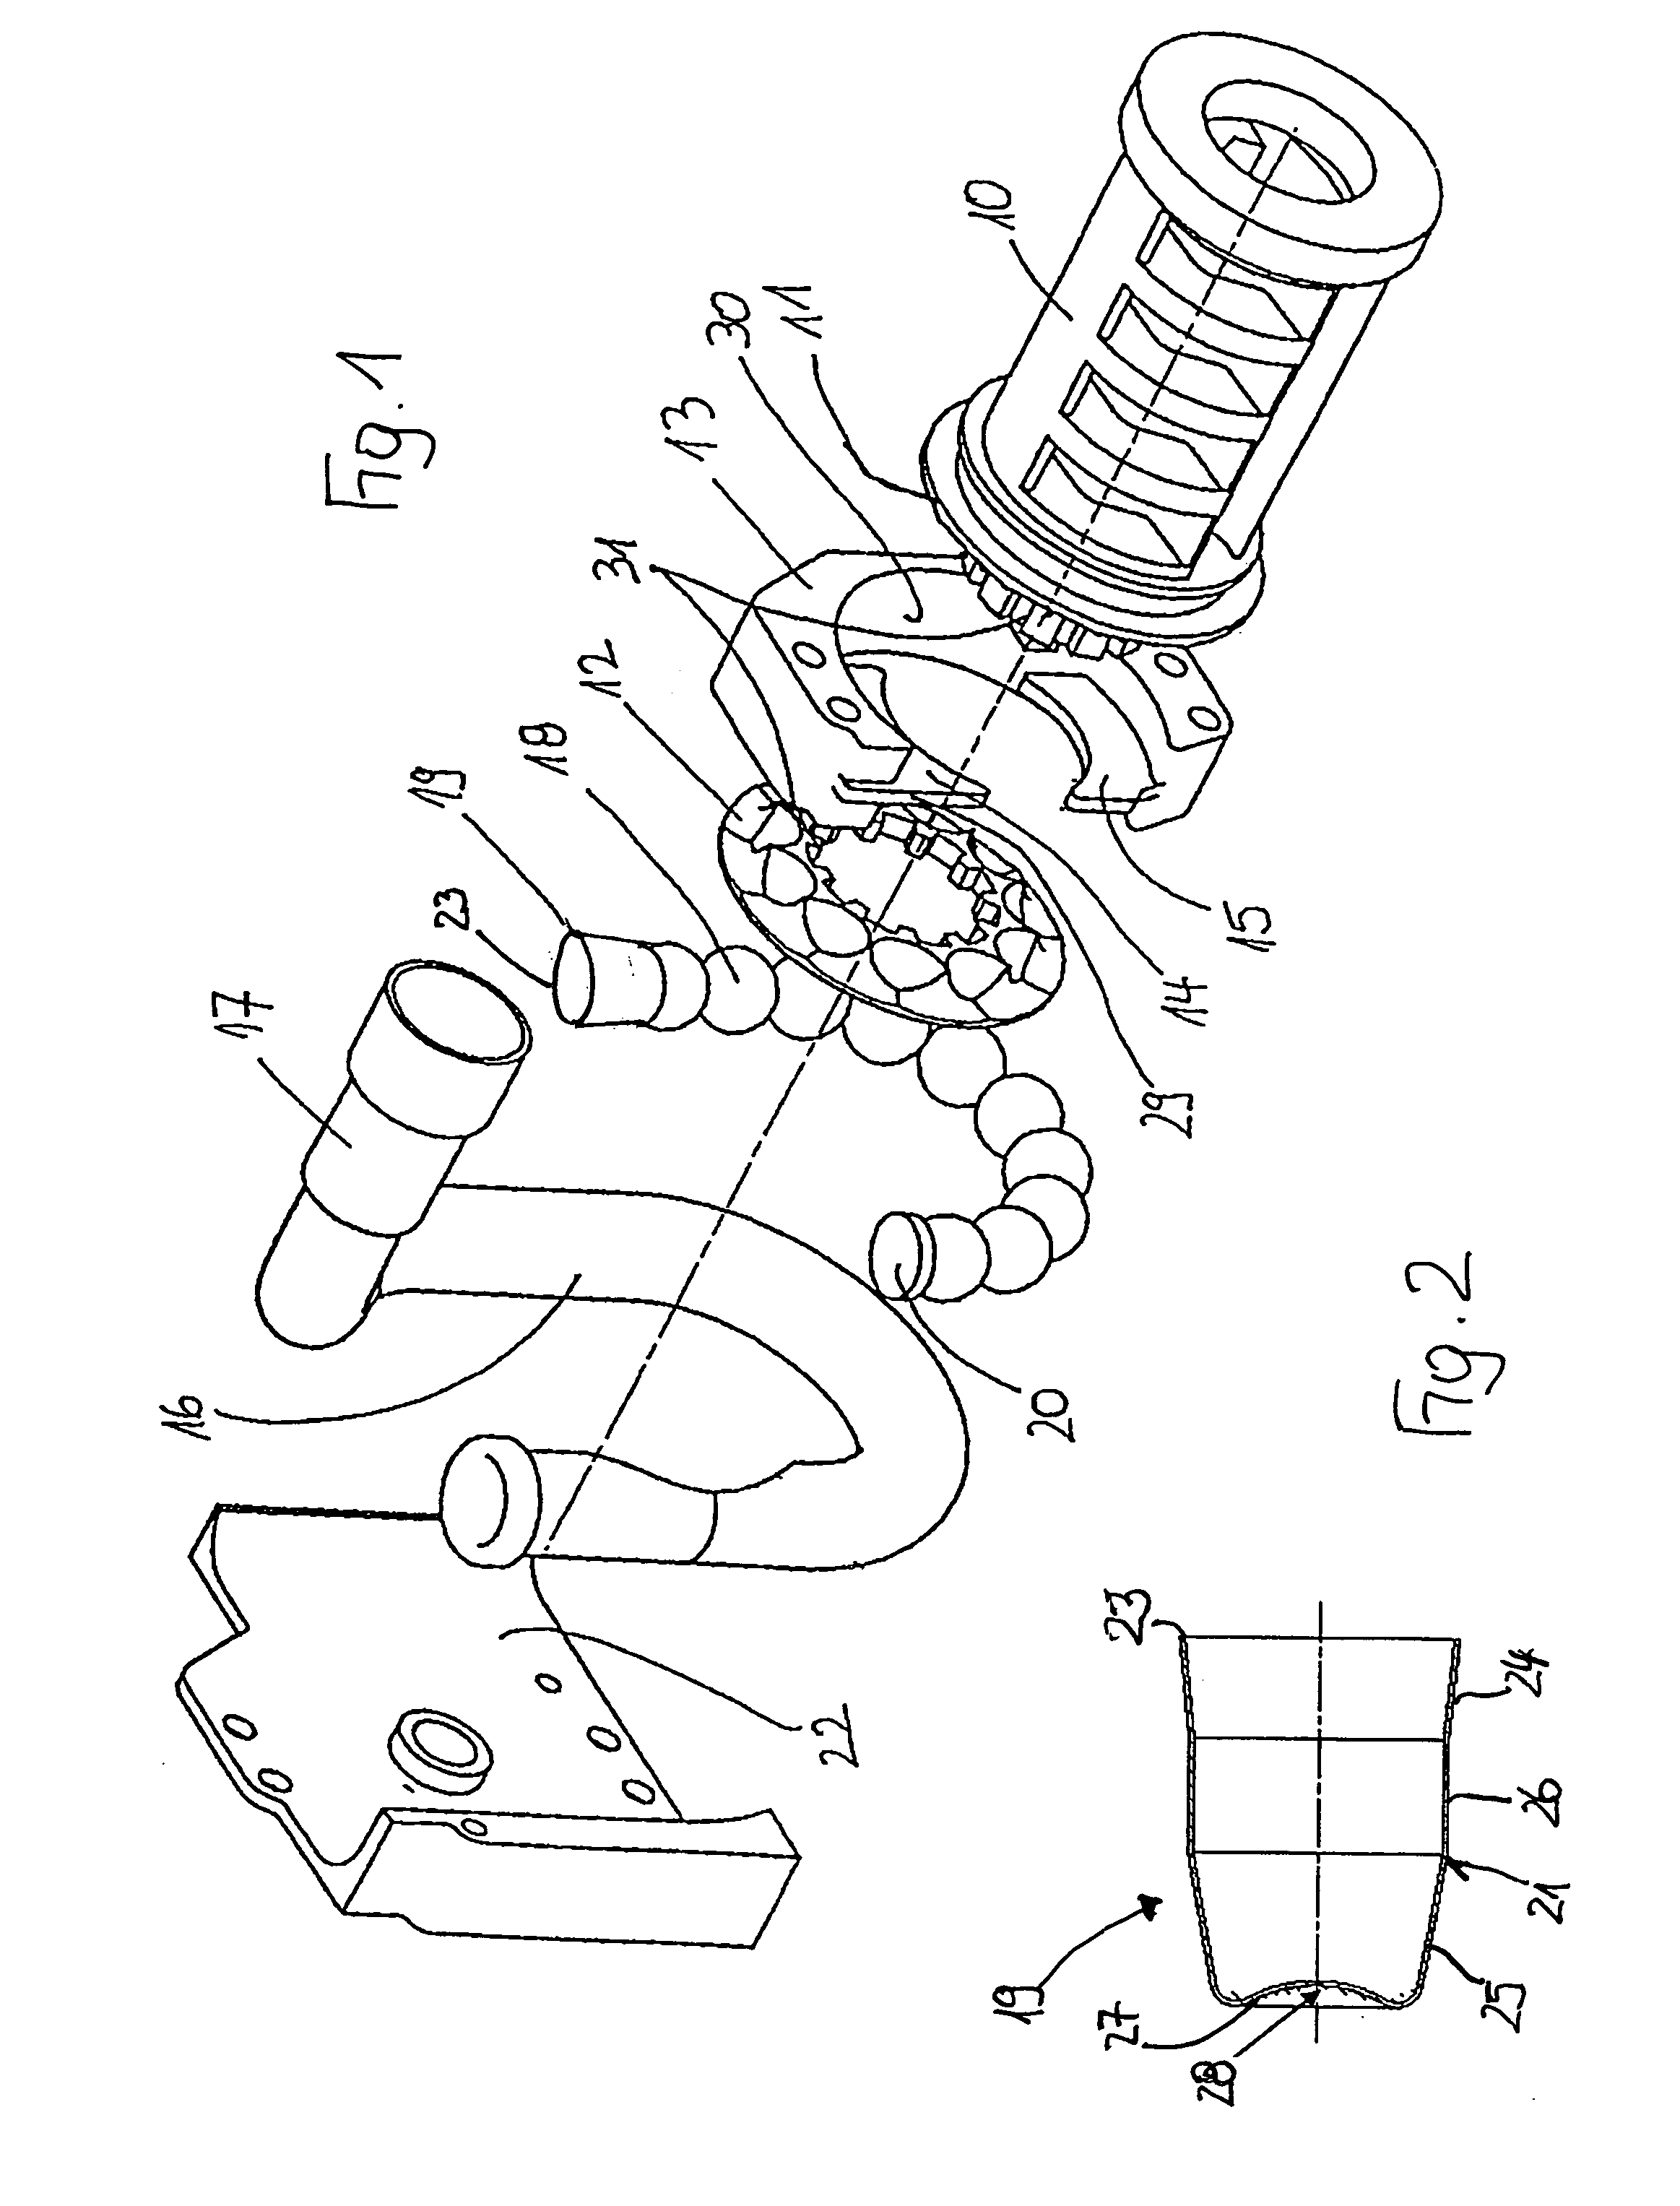 Belt Tensioner With a Cup-Shaped Drive Piston